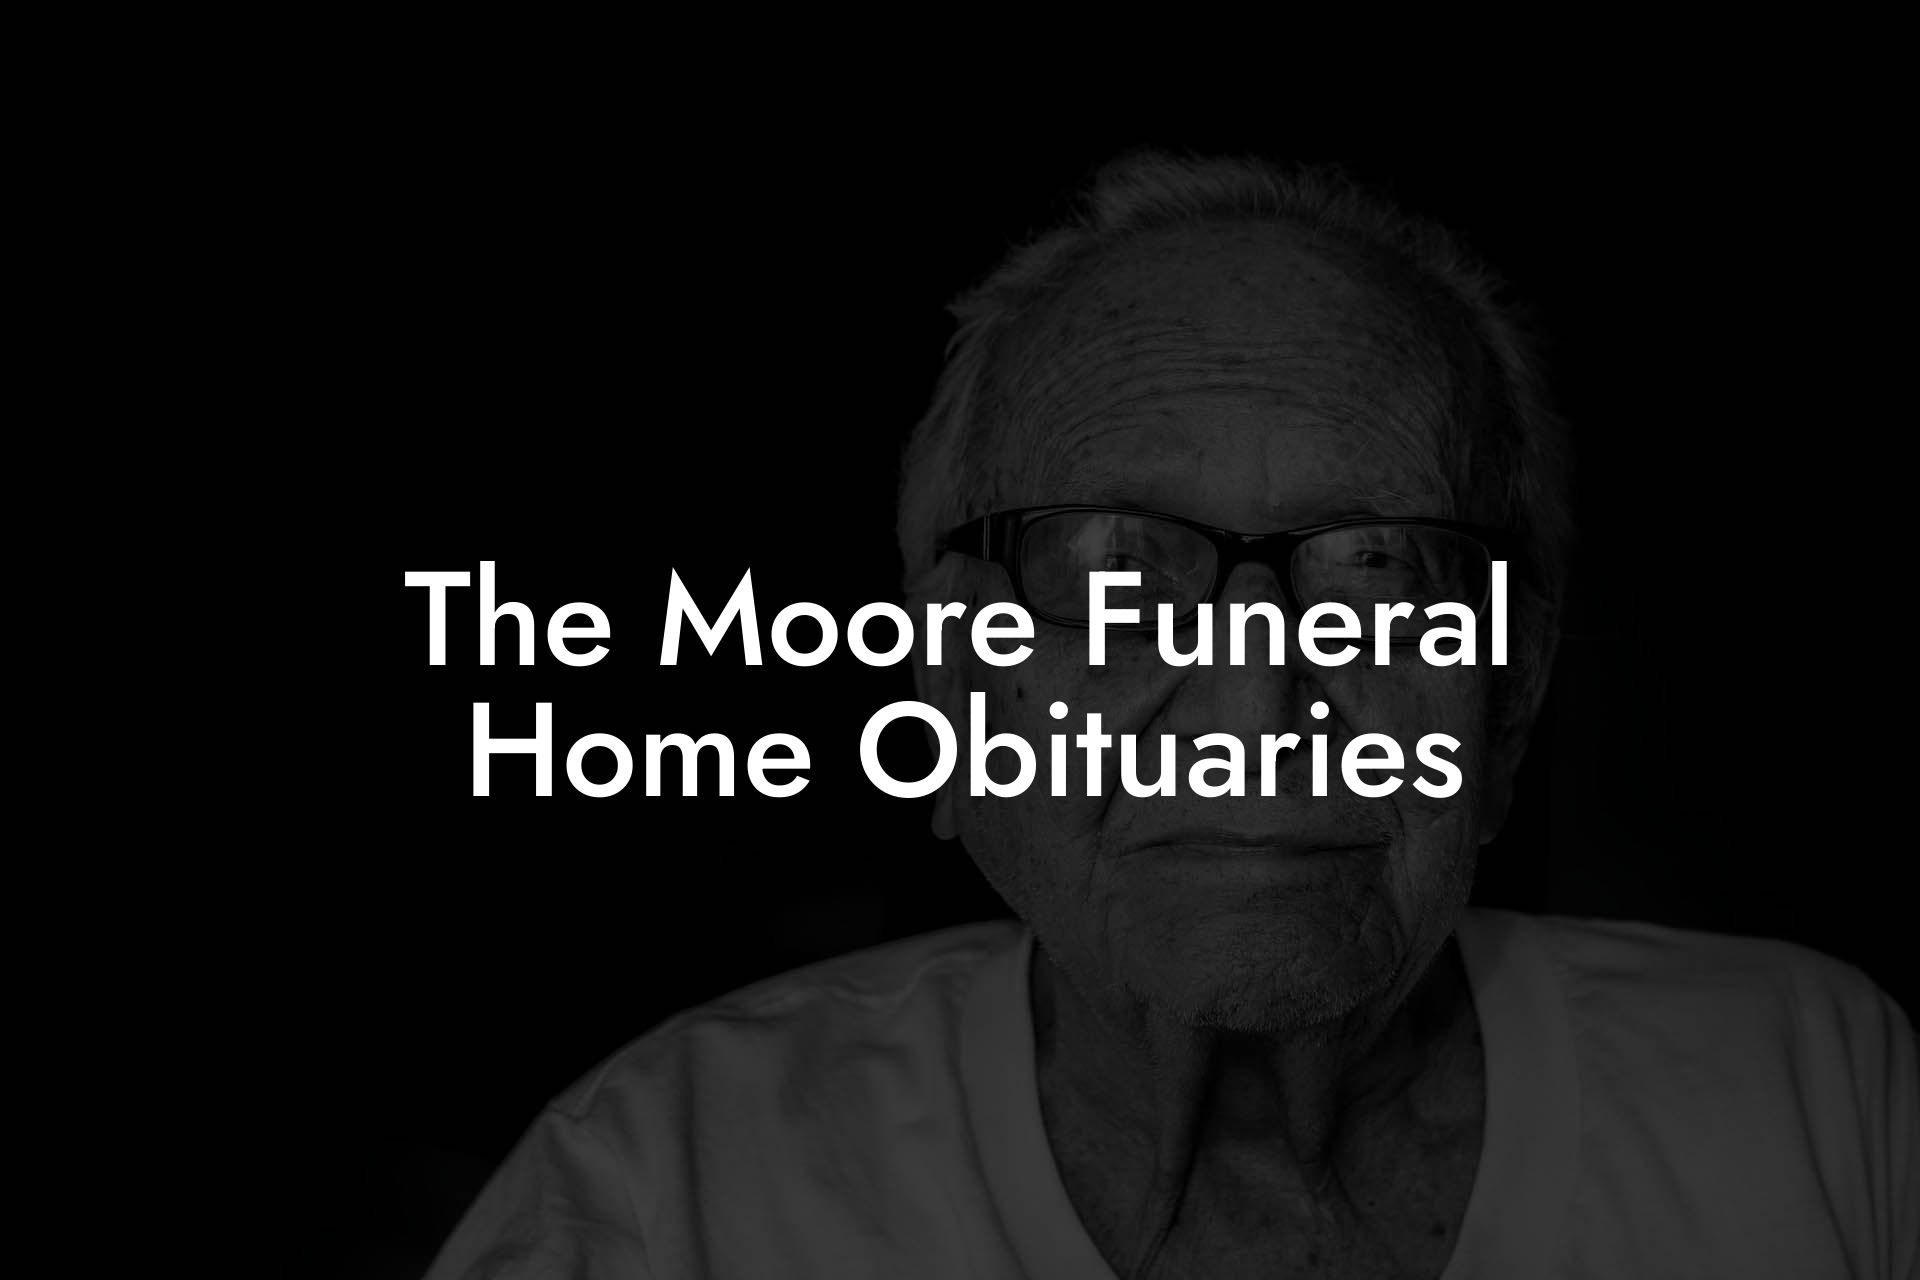 The Moore Funeral Home Obituaries